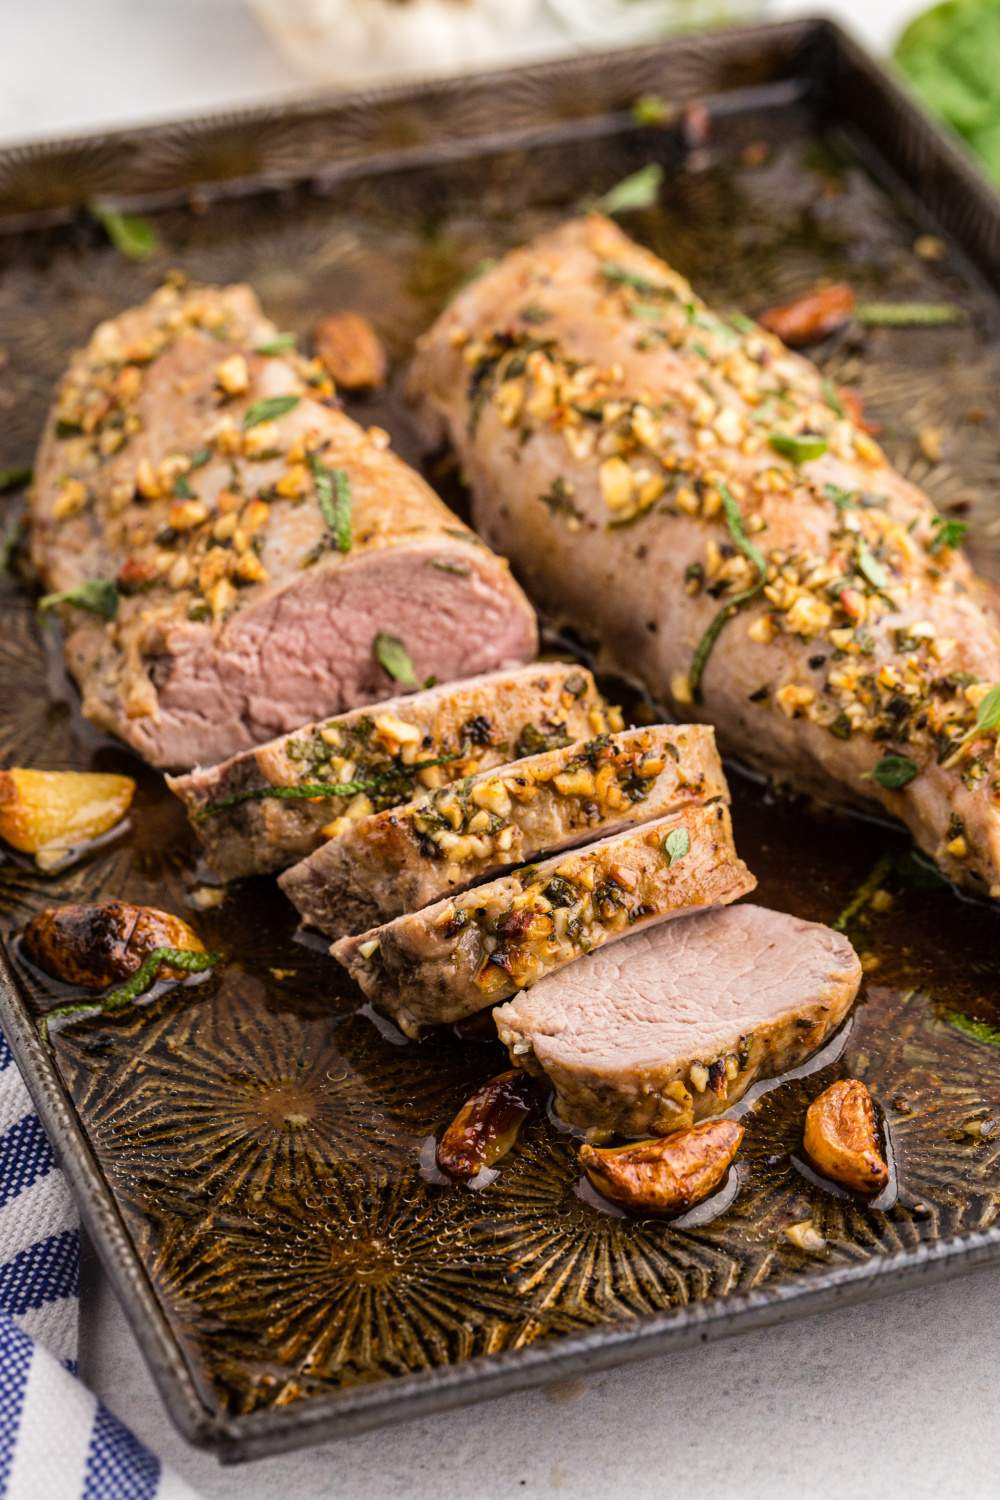 This Garlic Roasted Pork Tenderloin is made to melt in your mouth with buttery goodness and aromatic flavors thanks to the herbs, chopped garlic and basting! via @familyfresh